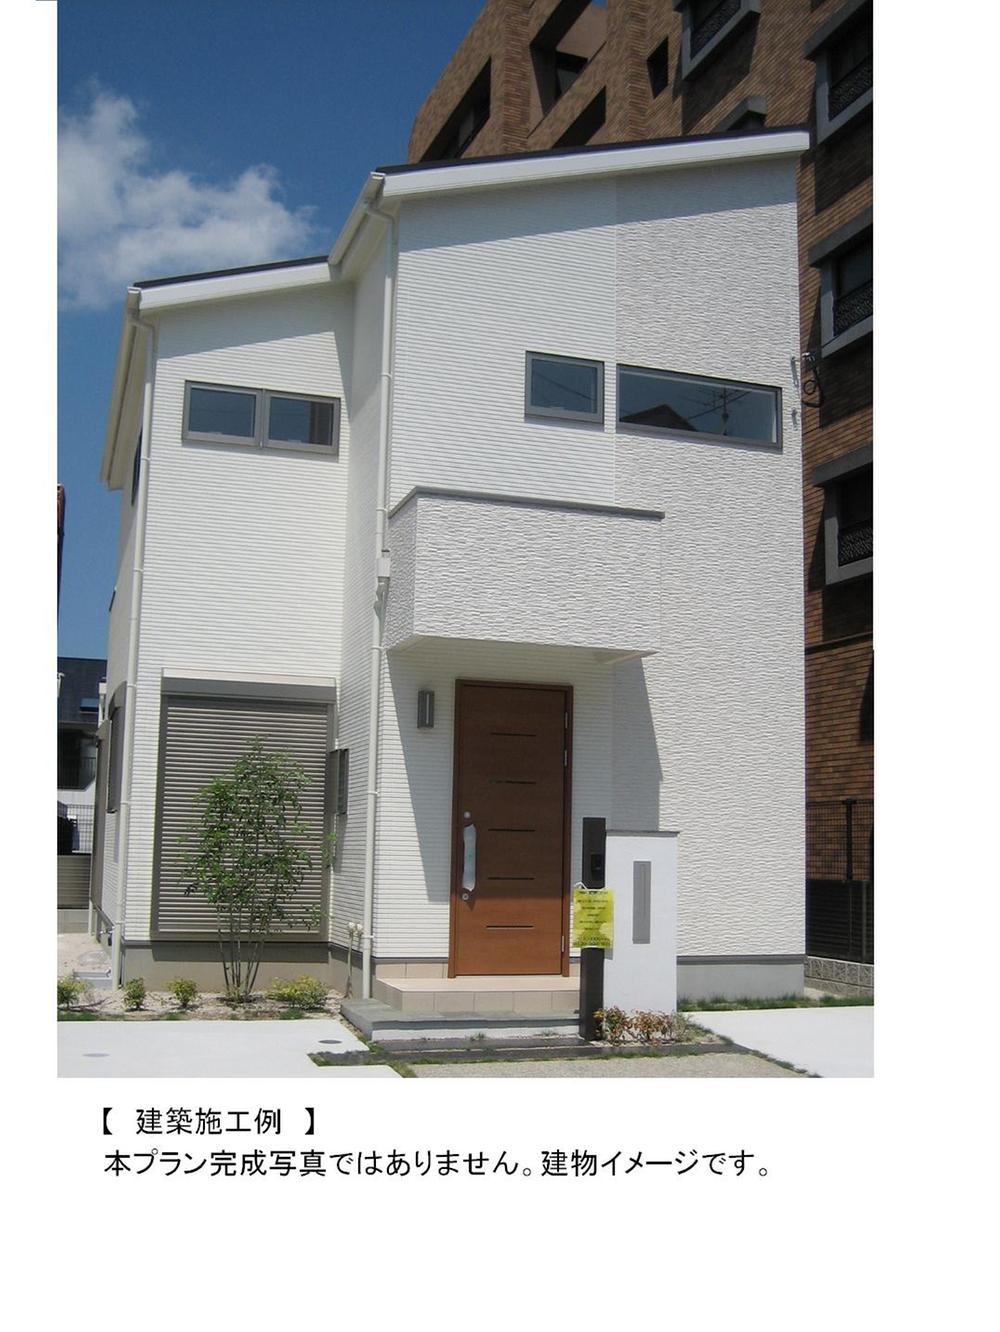 Building plan example (exterior photos). Building plan example  Building price 11,411,800 yen, Building area 81.97 sq m   ※ The photograph is an image. 